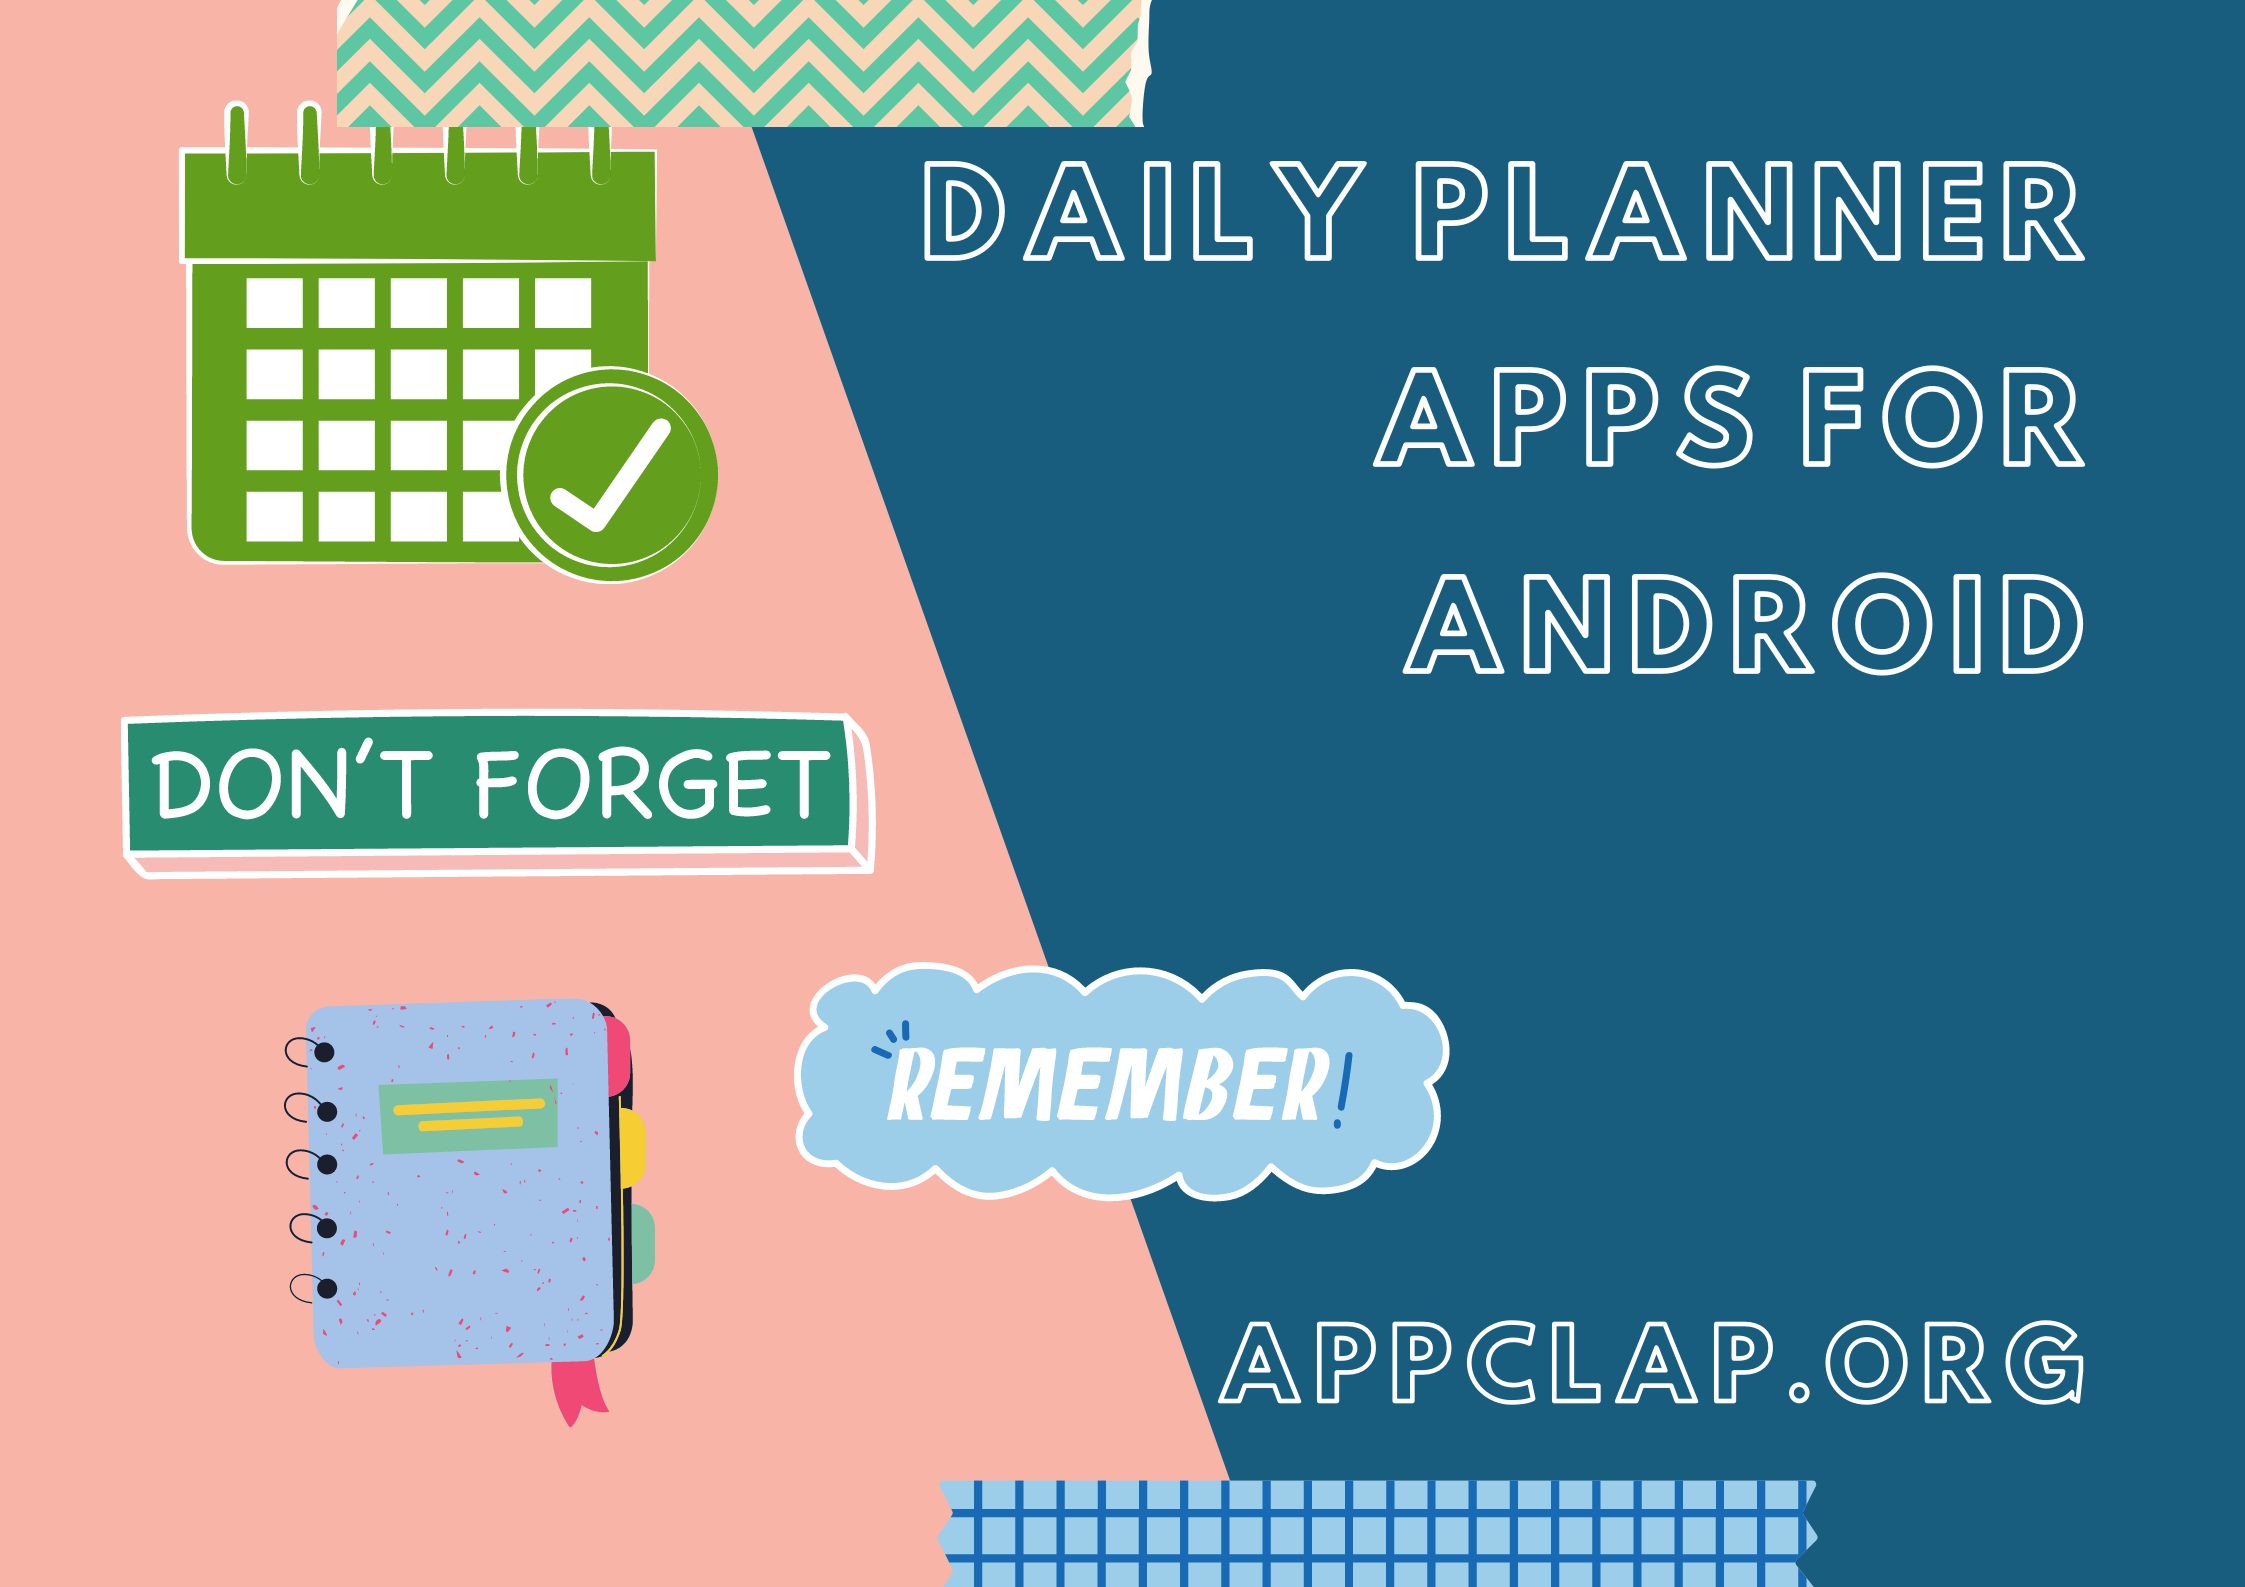 Daily Planner Apps for Android